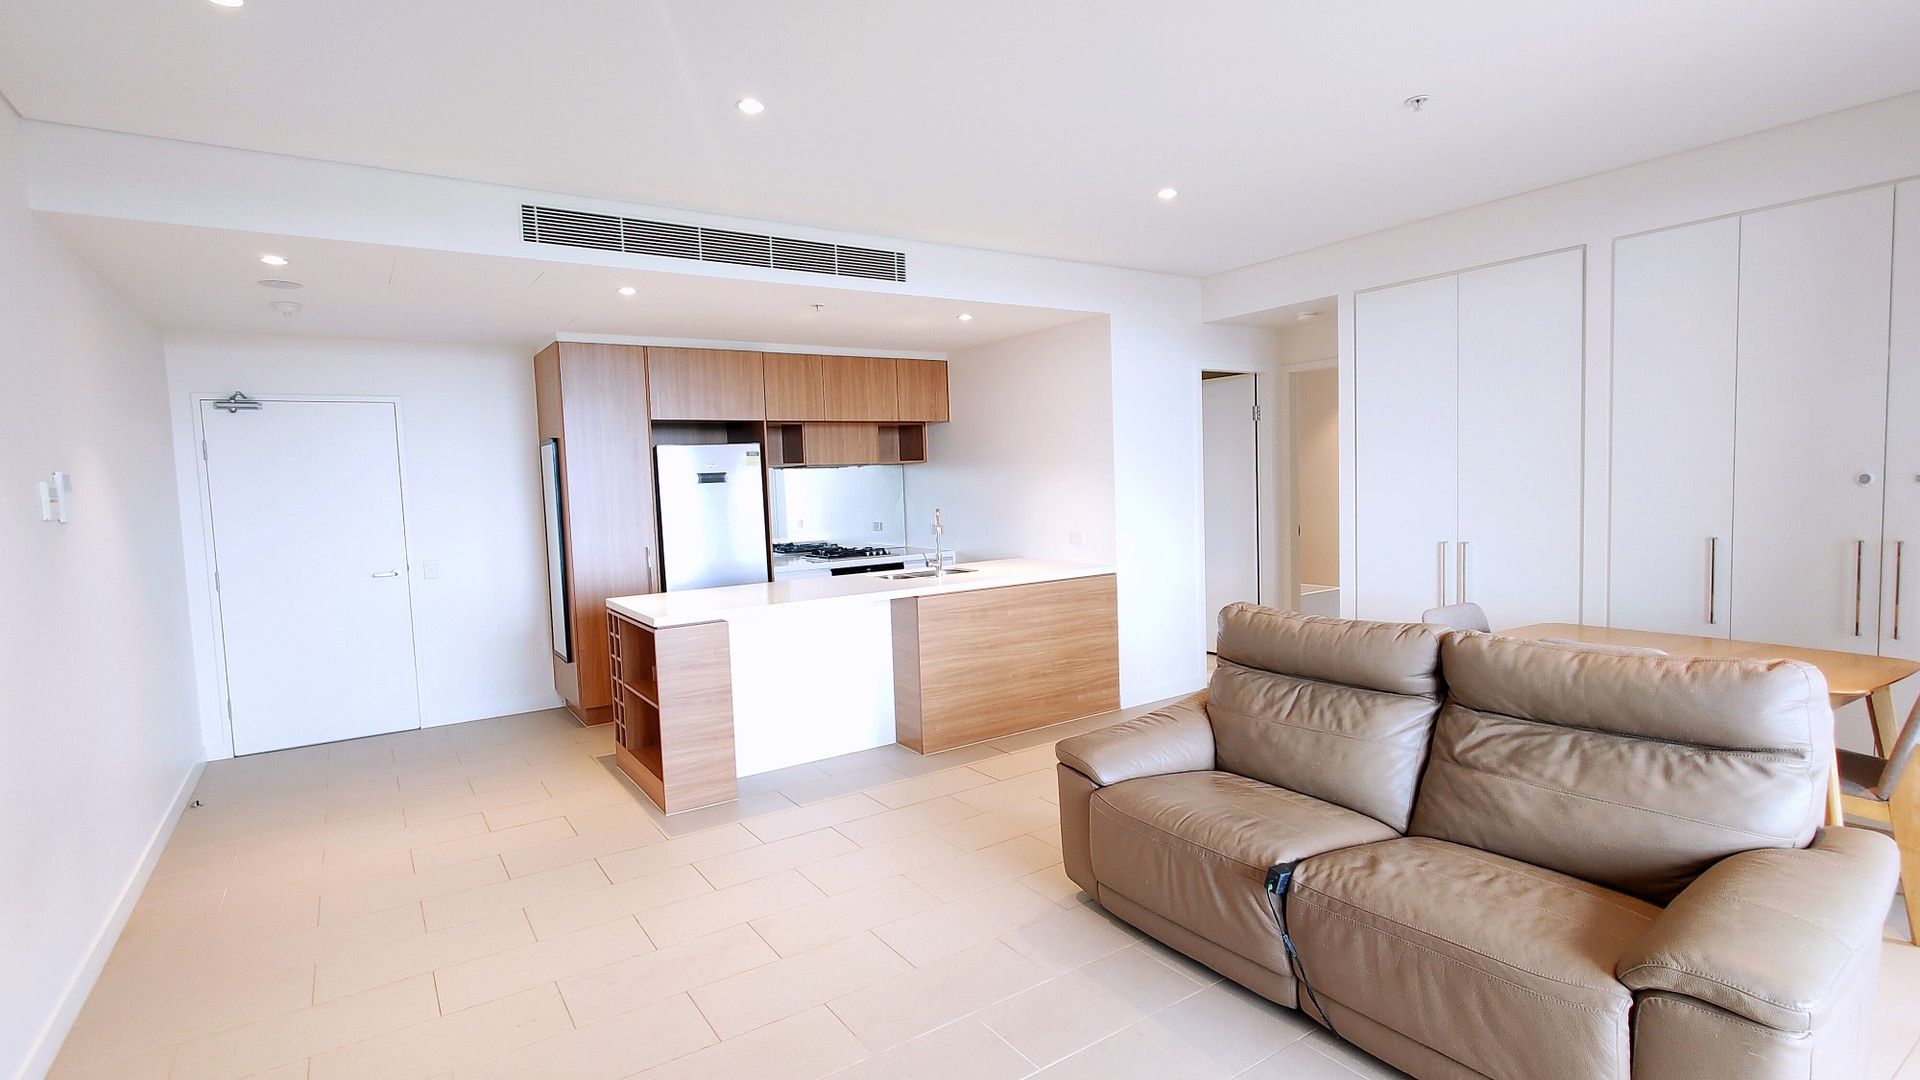 2 bedrooms Apartment / Unit / Flat in 1307/3 Network Place NORTH RYDE NSW, 2113